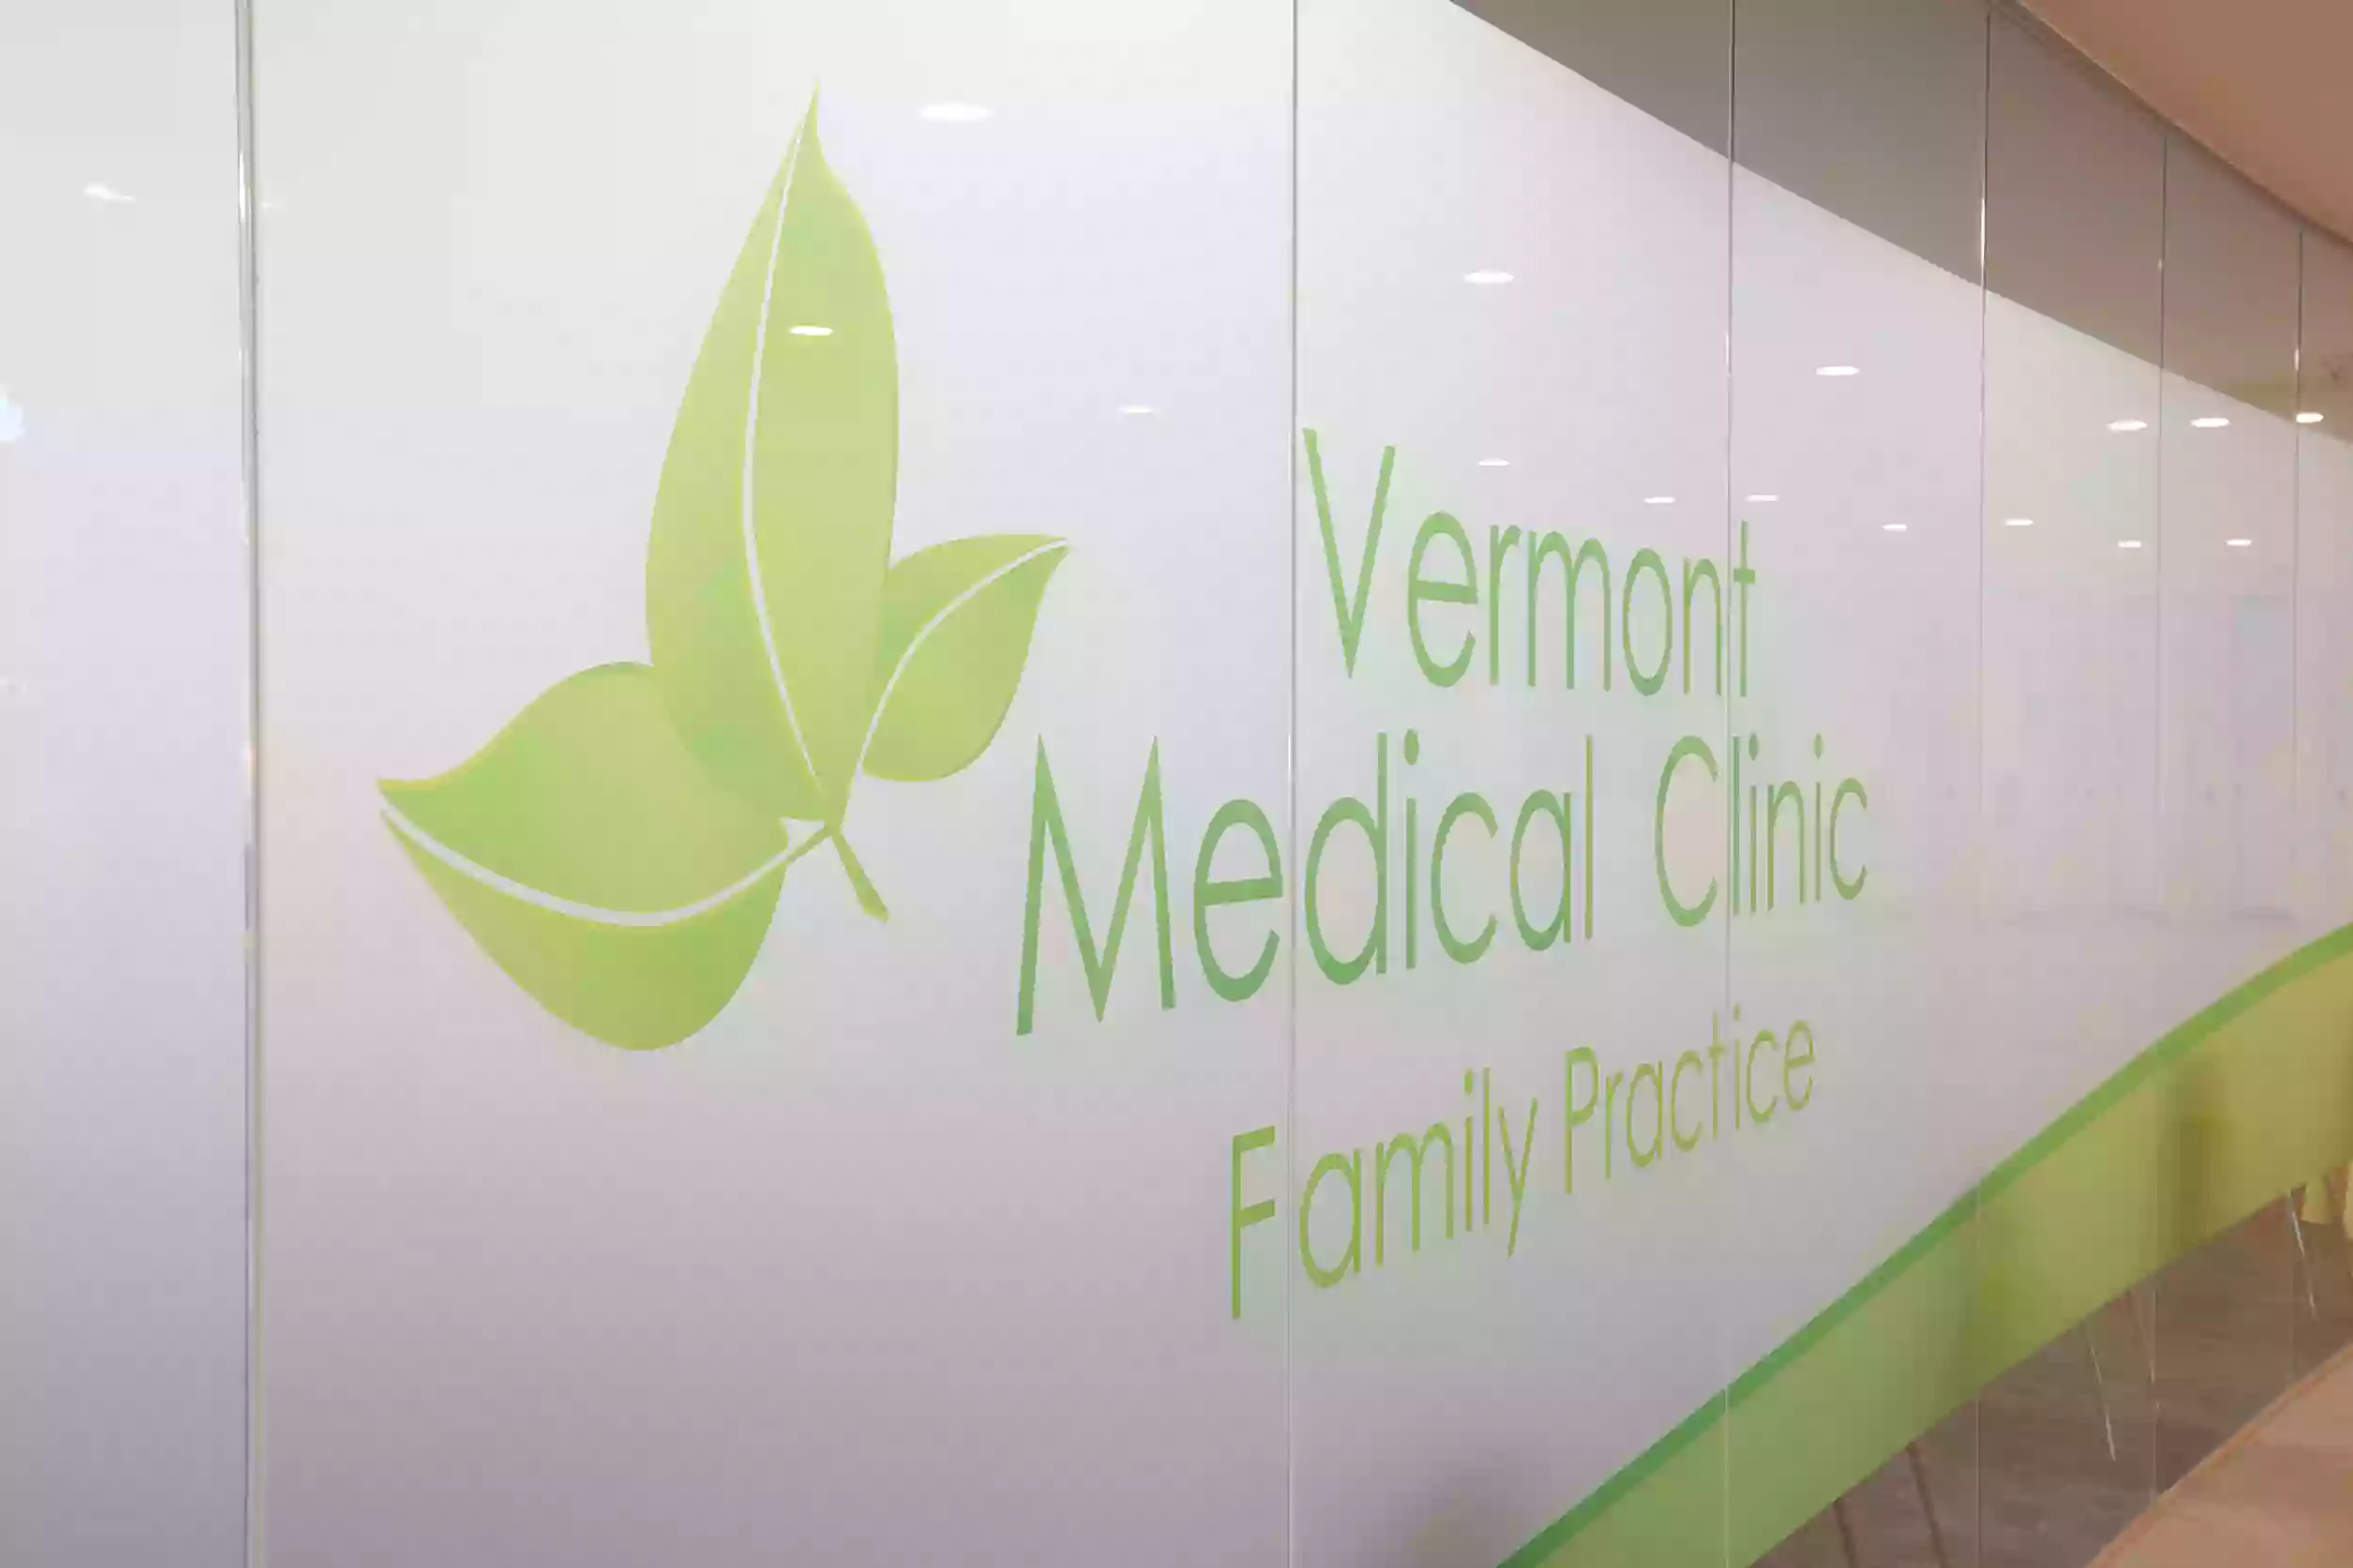 Vermont Medical Clinic